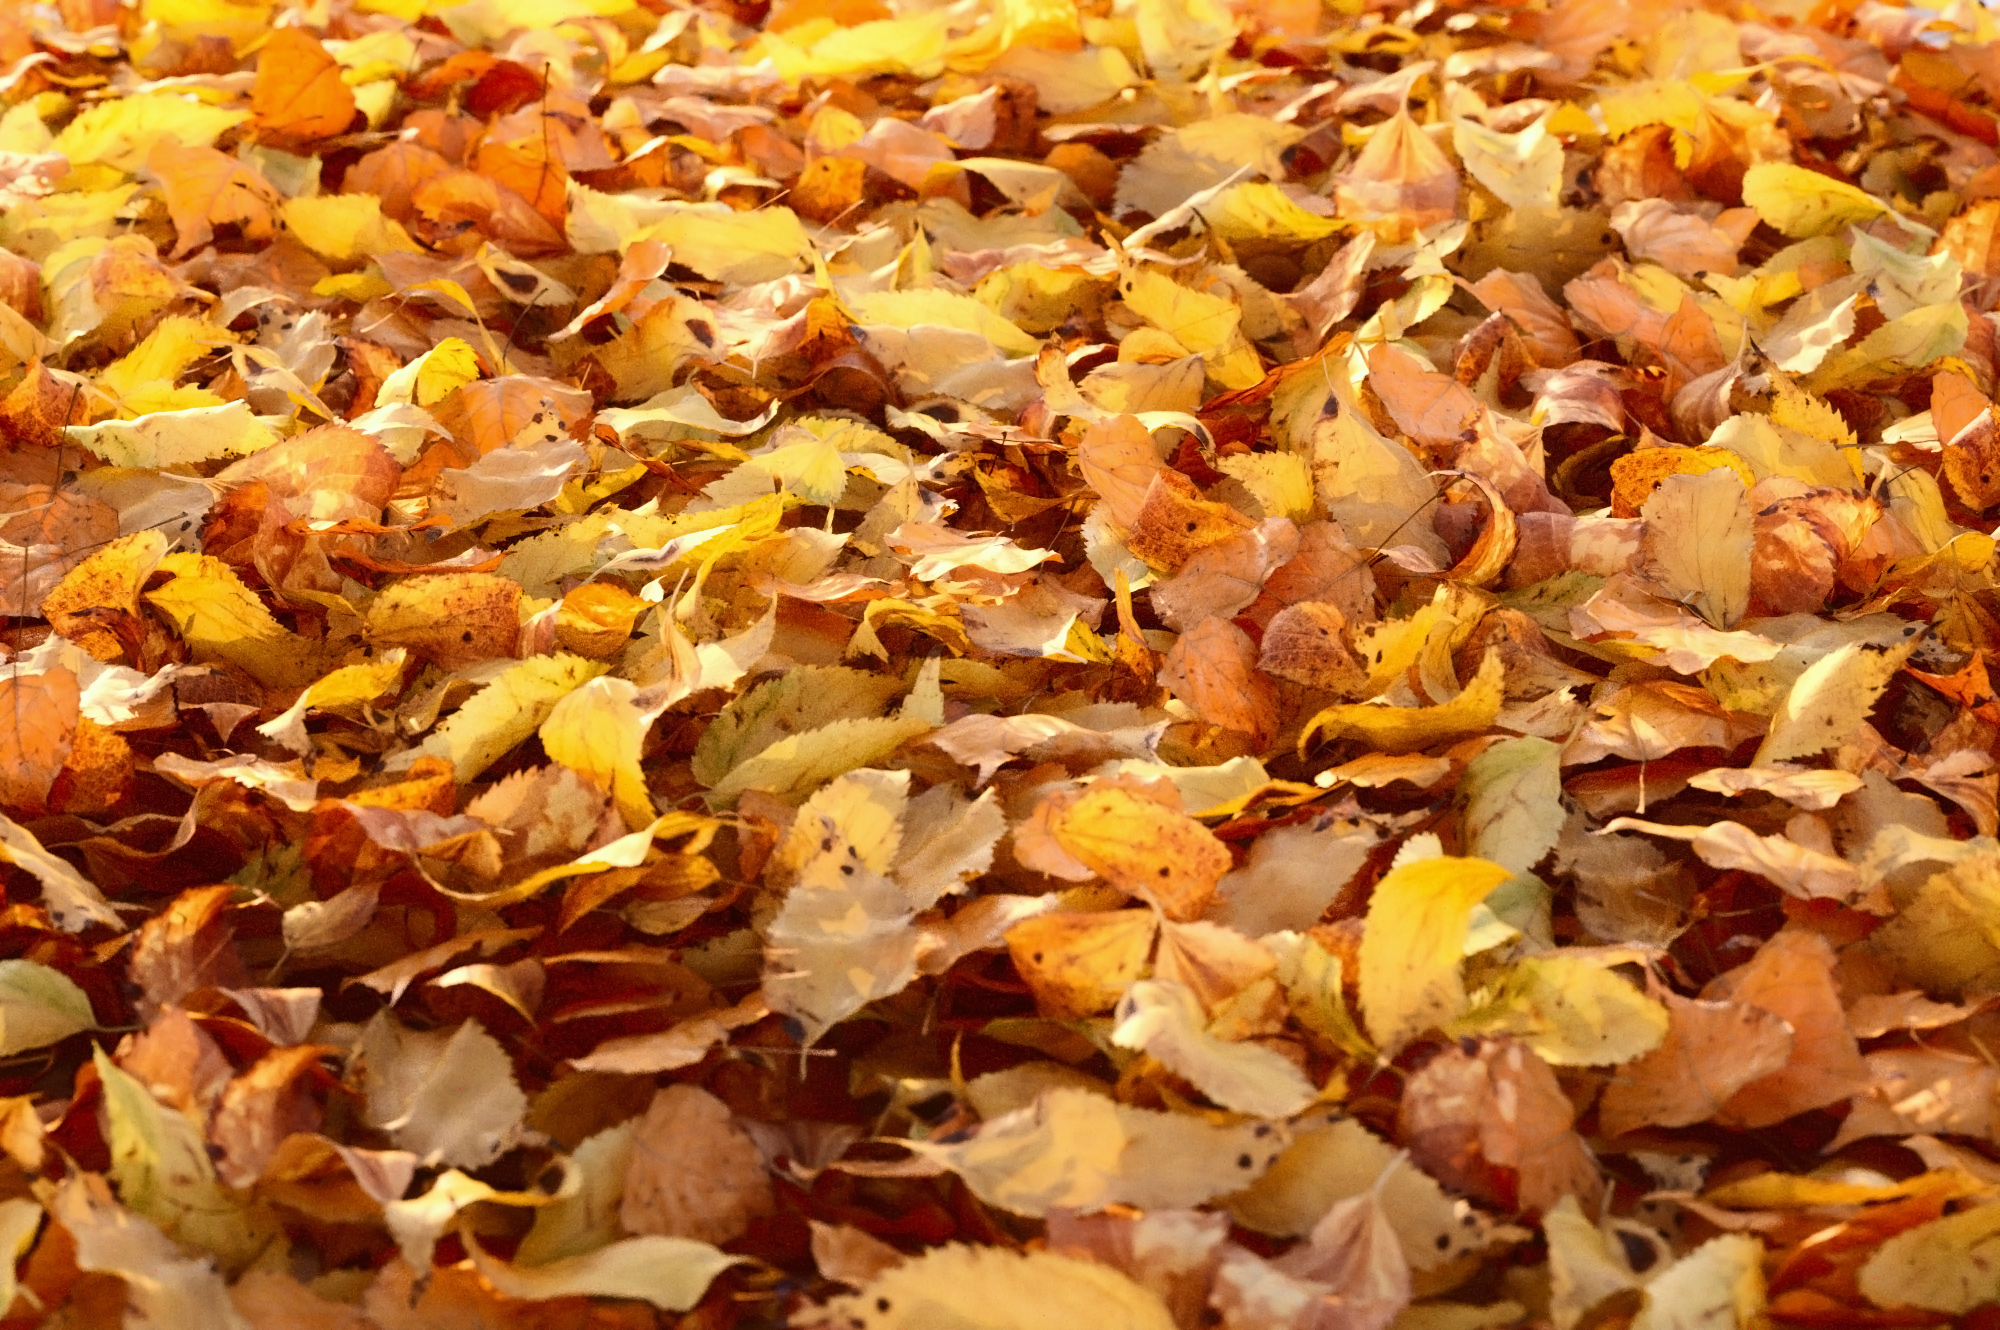 Product: Autumn Leaves | MaxwellZone